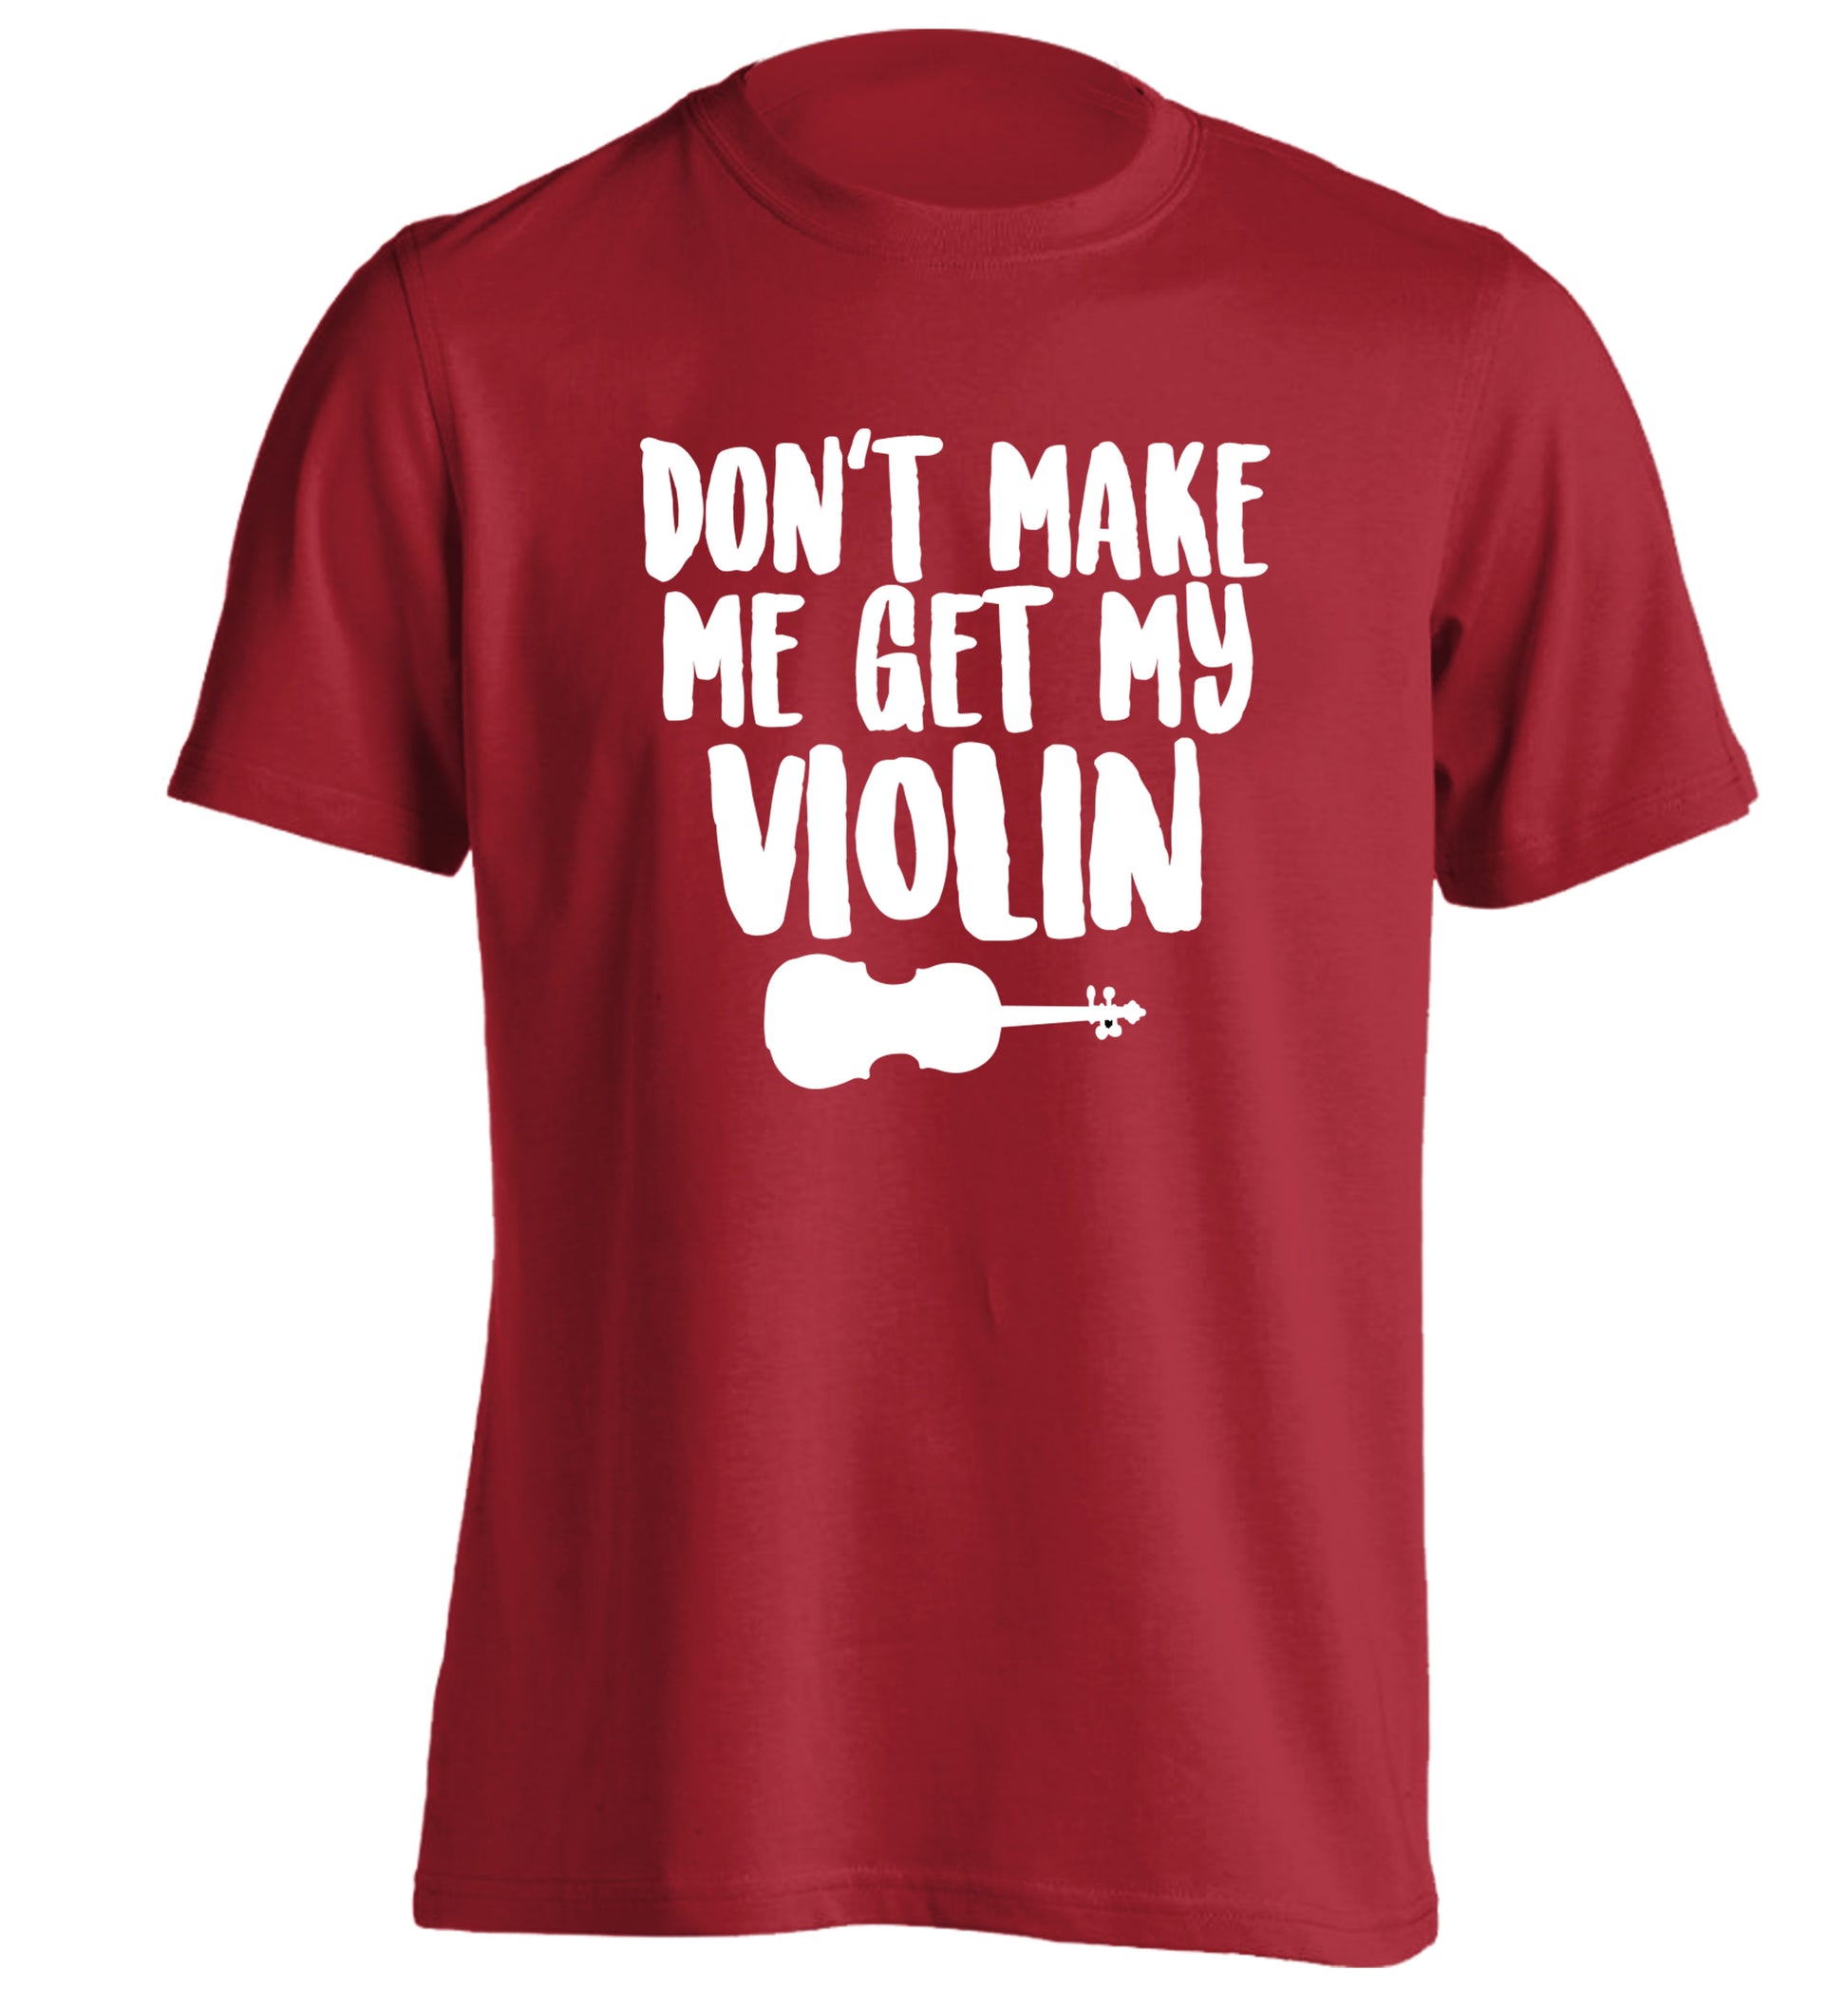 Don't make me get my violin adults unisex red Tshirt 2XL